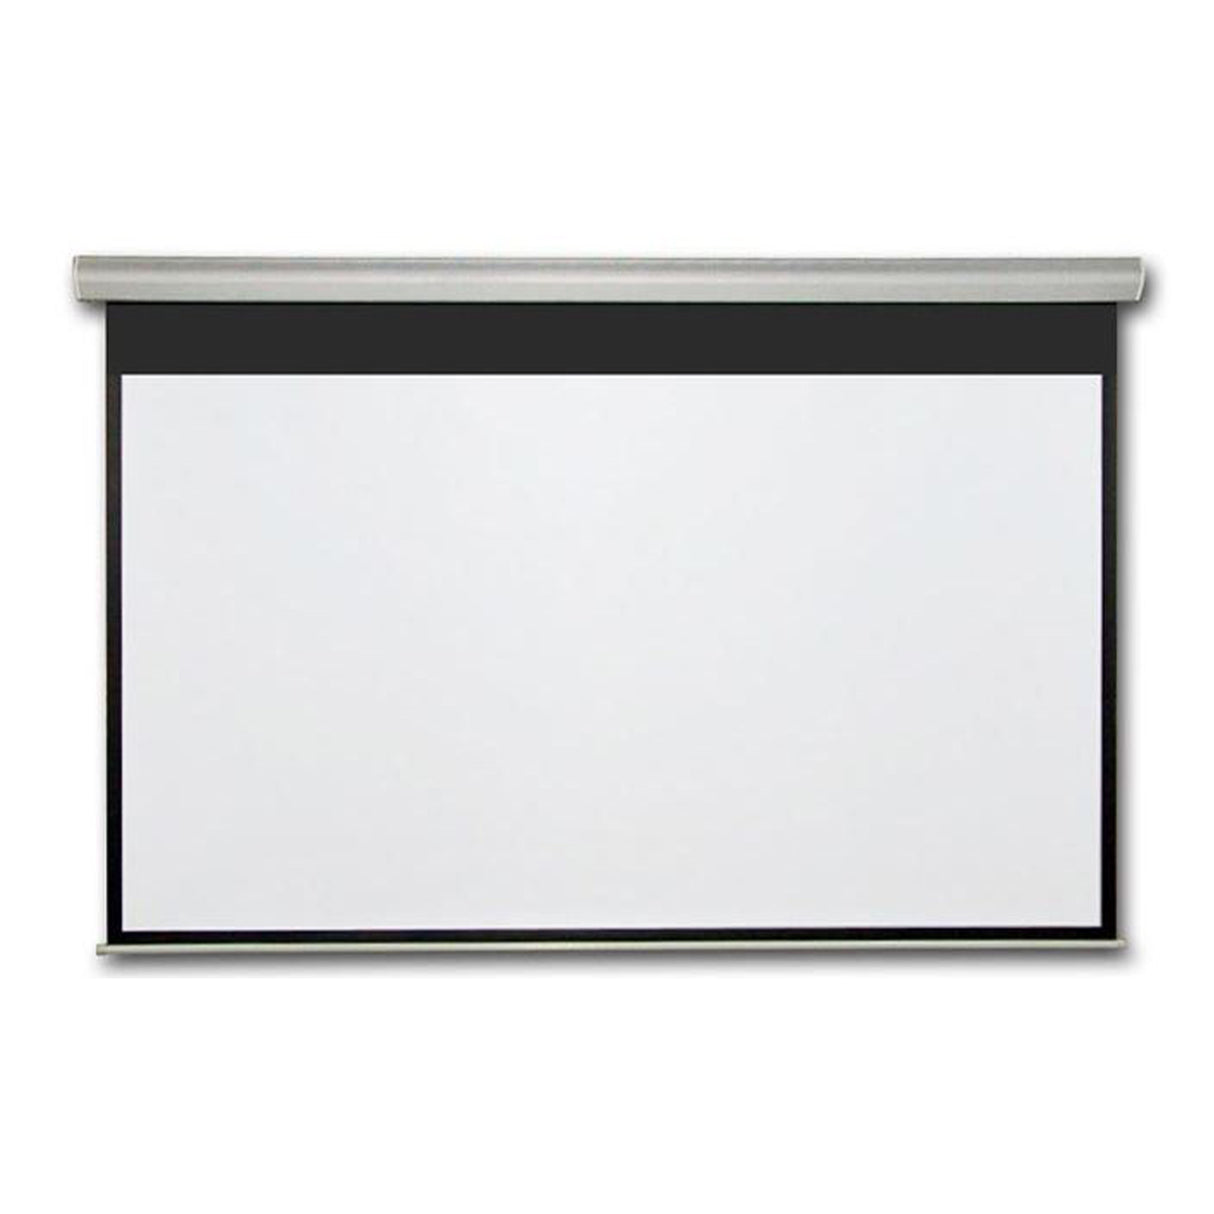 RNT Projection Screen Motorised 150 Inches - 16:9 Ratio